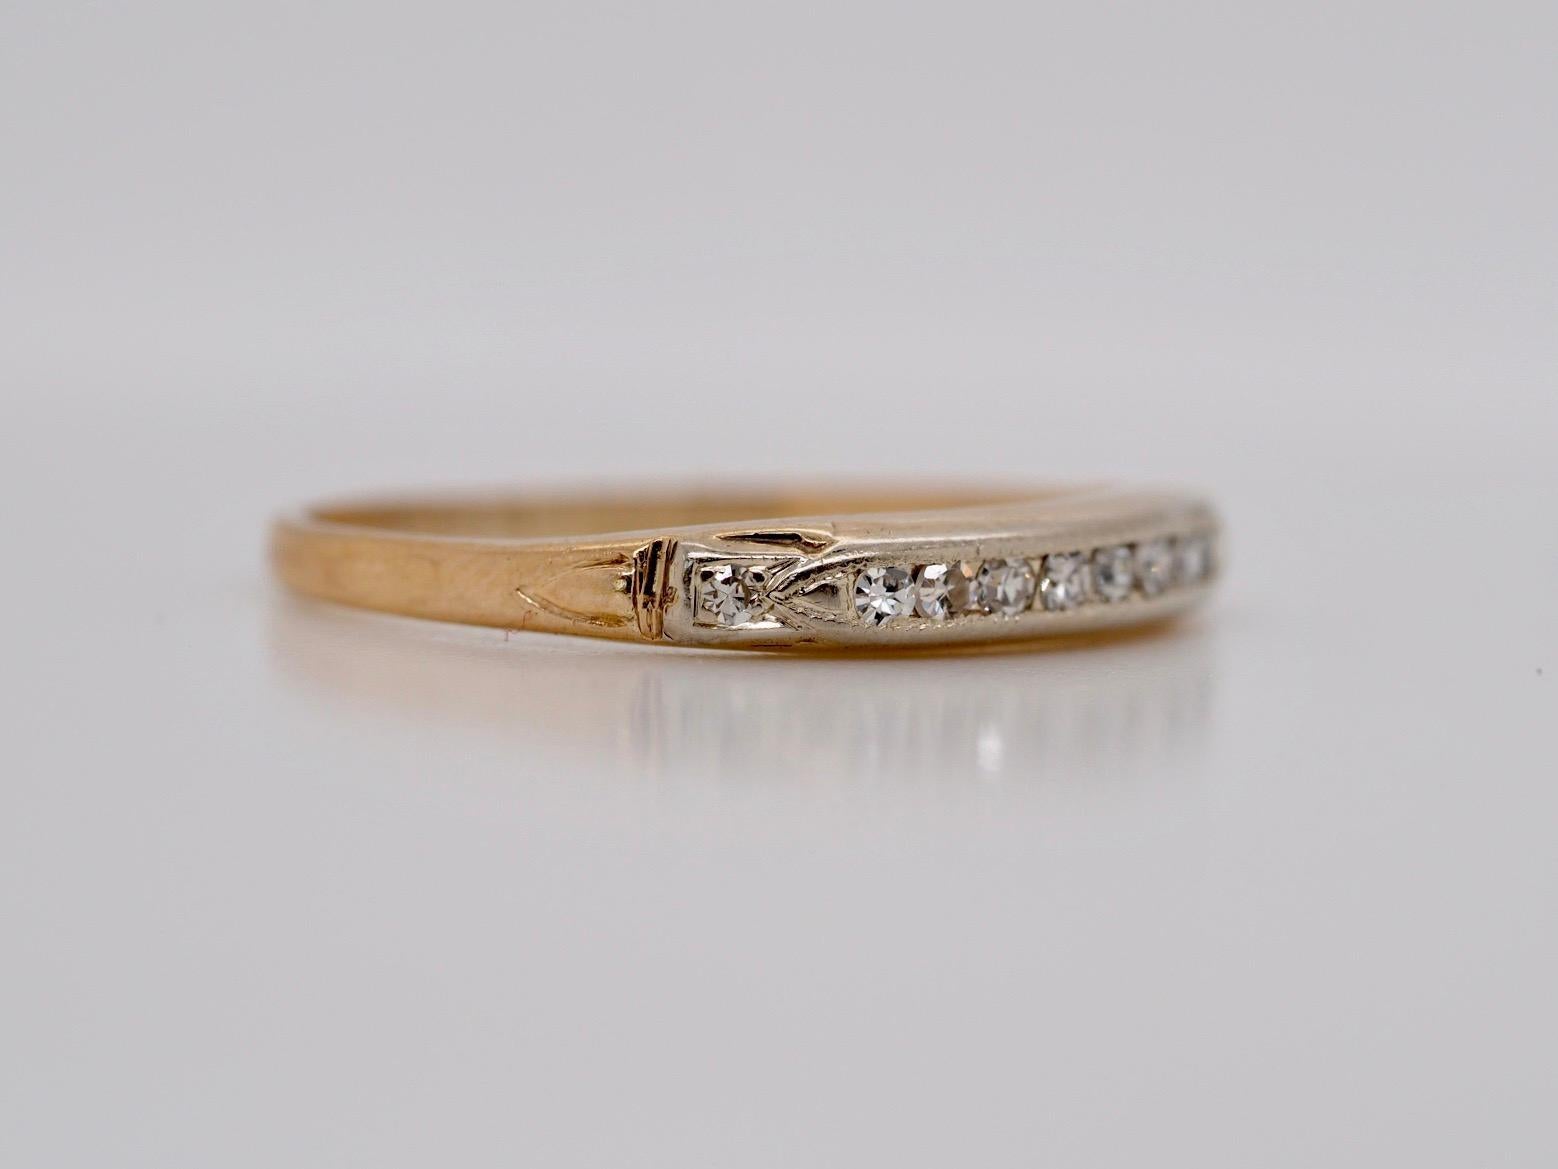 This classica art deco 14K Yellow Gold band includes 10 channel set antique single cut diamonds across the top of the band. It is a beautifully made piece in excellent condition. We are able to size this ring up or down for an additional $30.00 fee